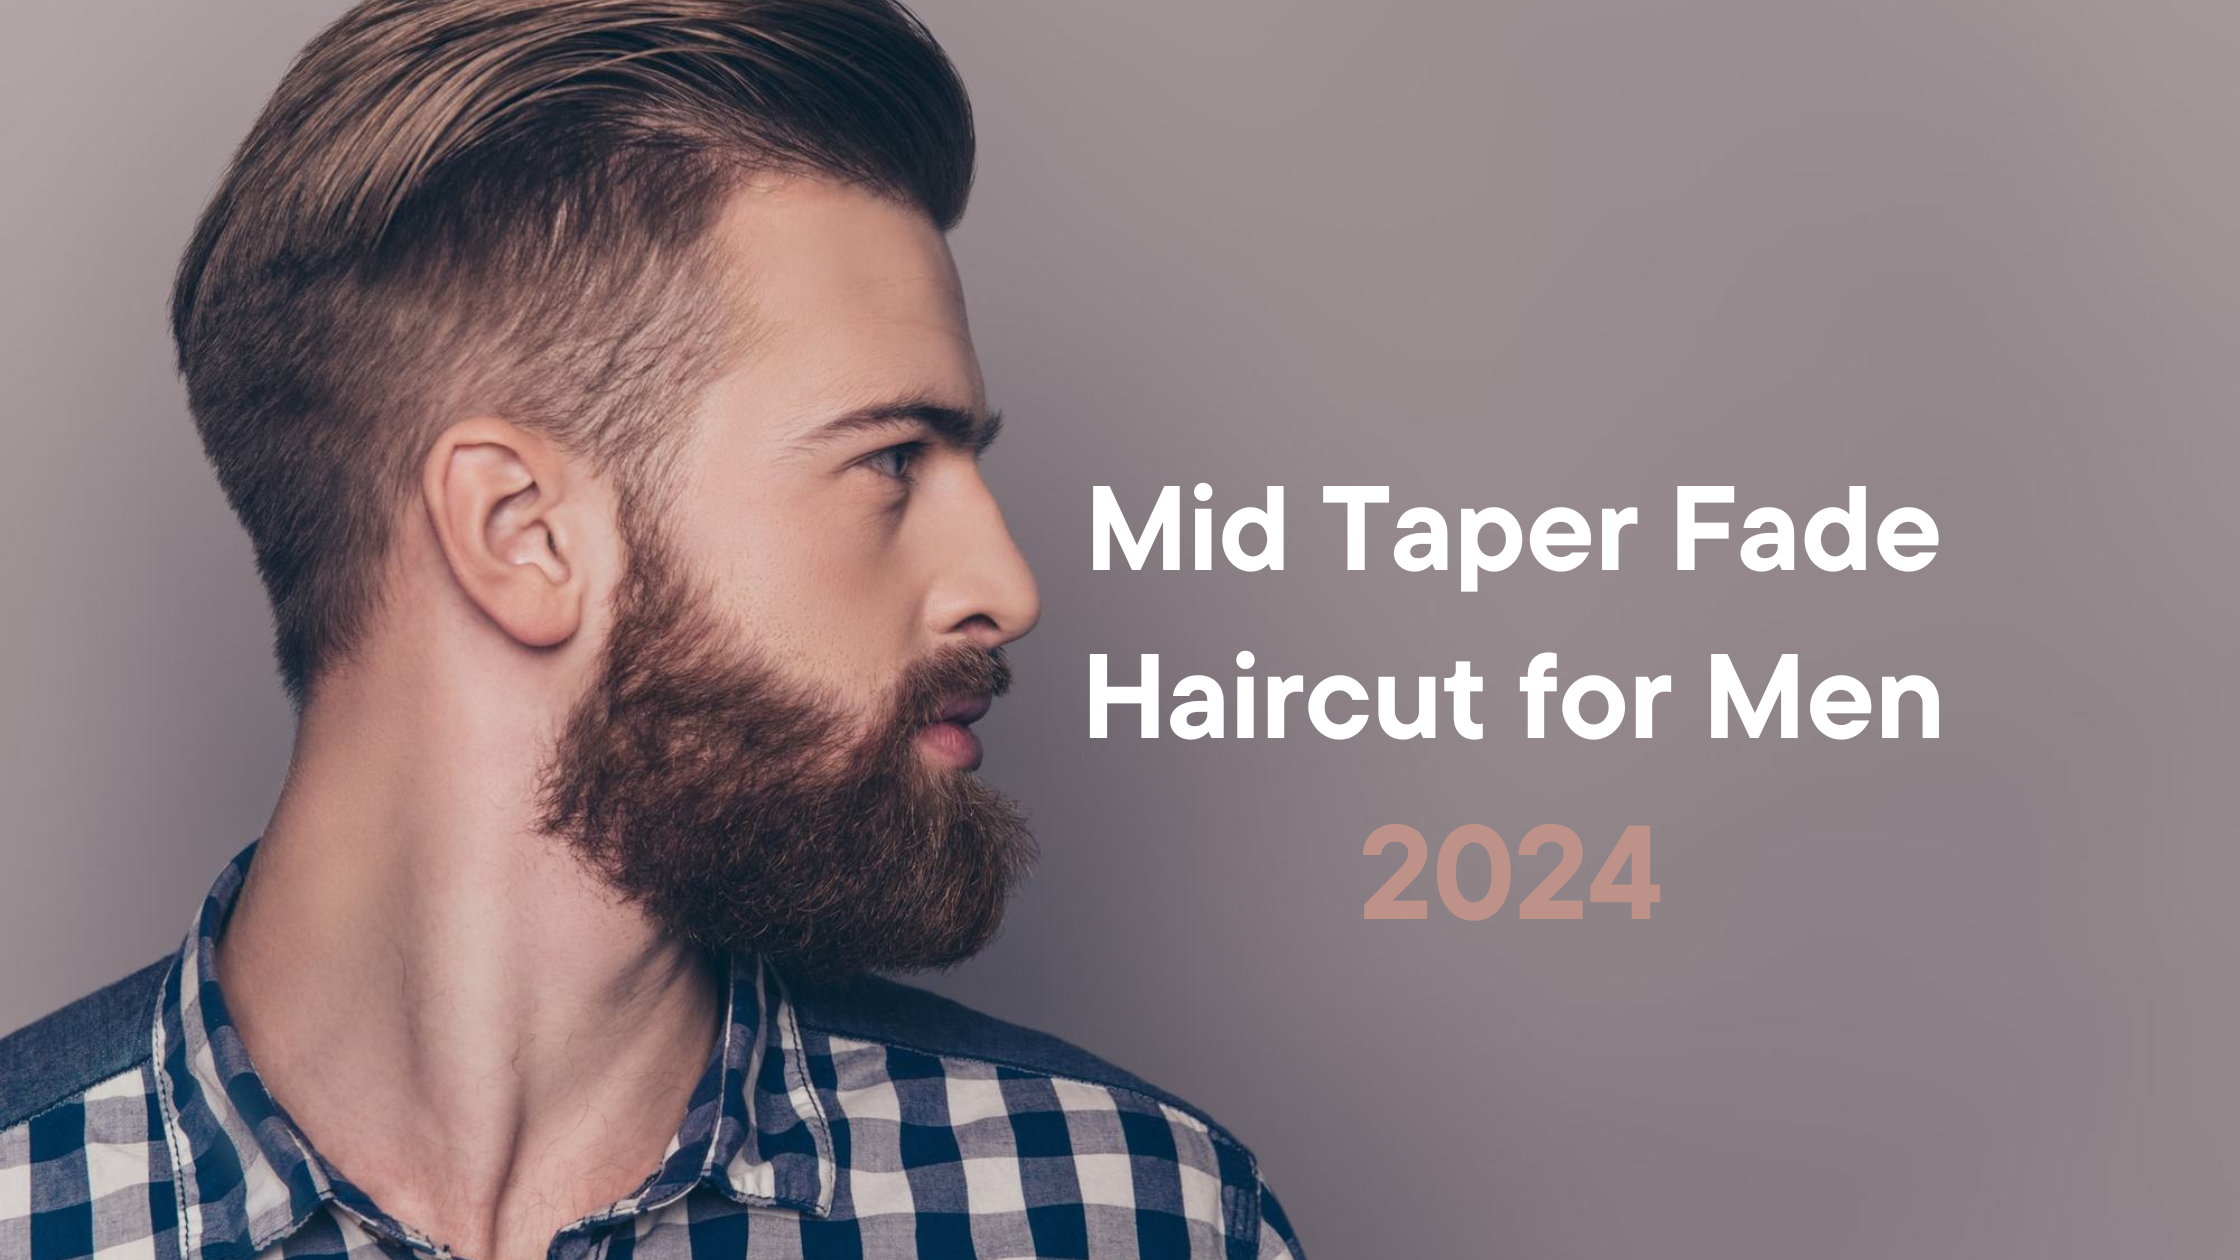 Haircut Styles For Men: 10 Latest Men's Hairstyle Trends For 2016